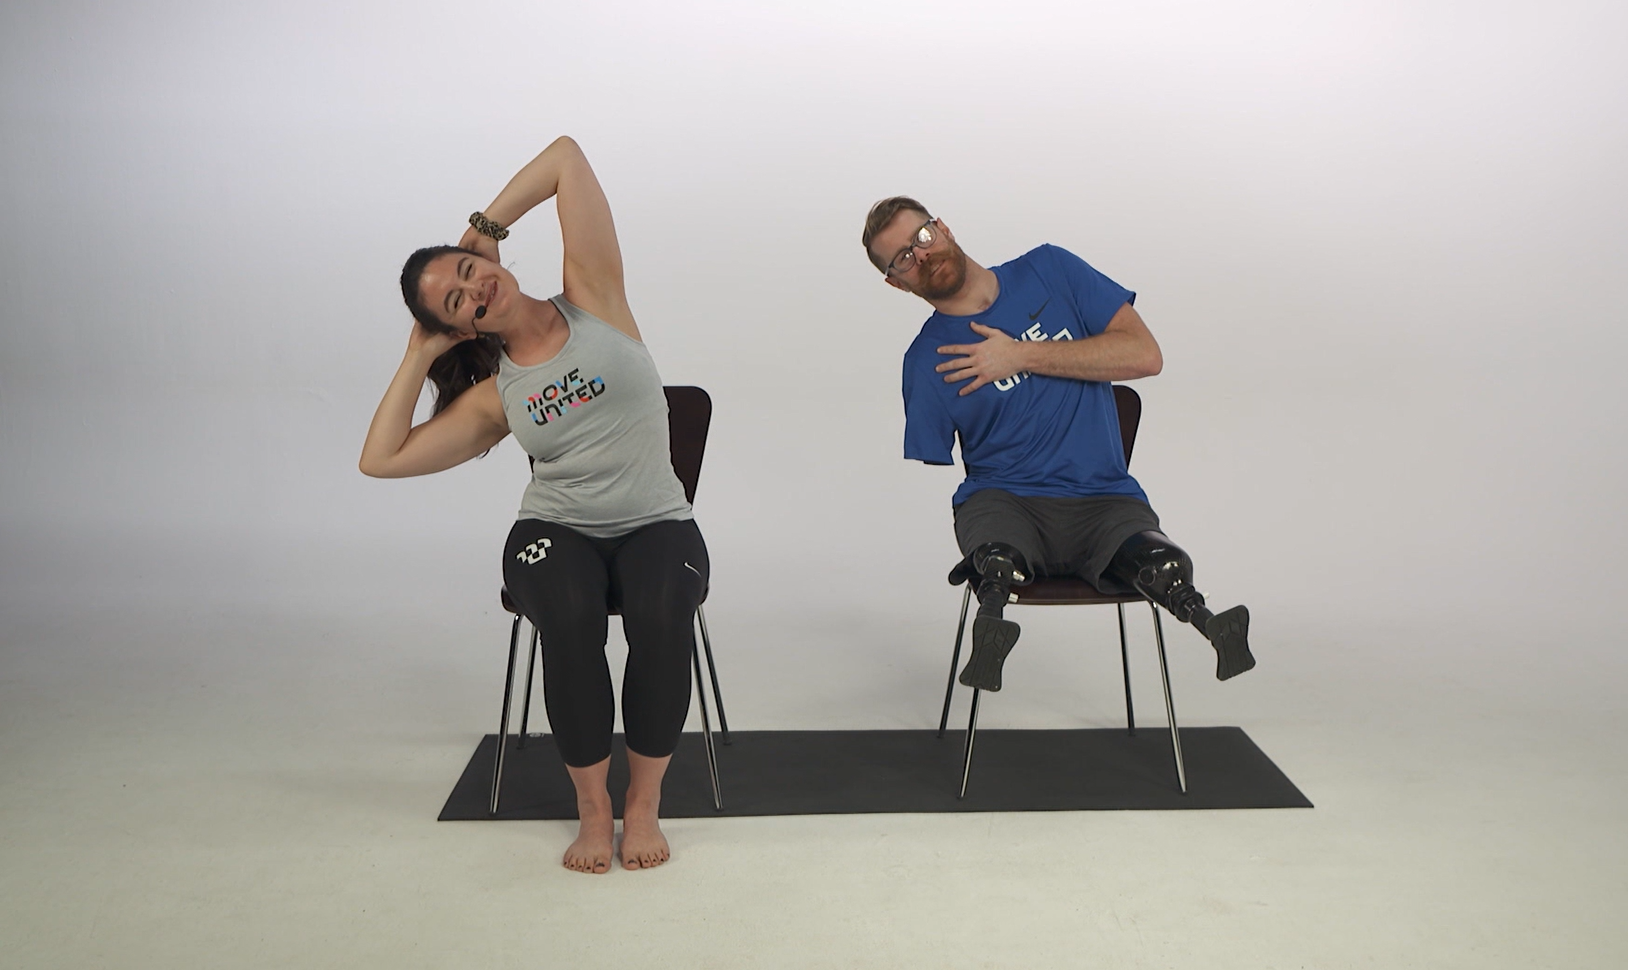 Yoga Instructor Laura with Student Zach leading OnDemand workout